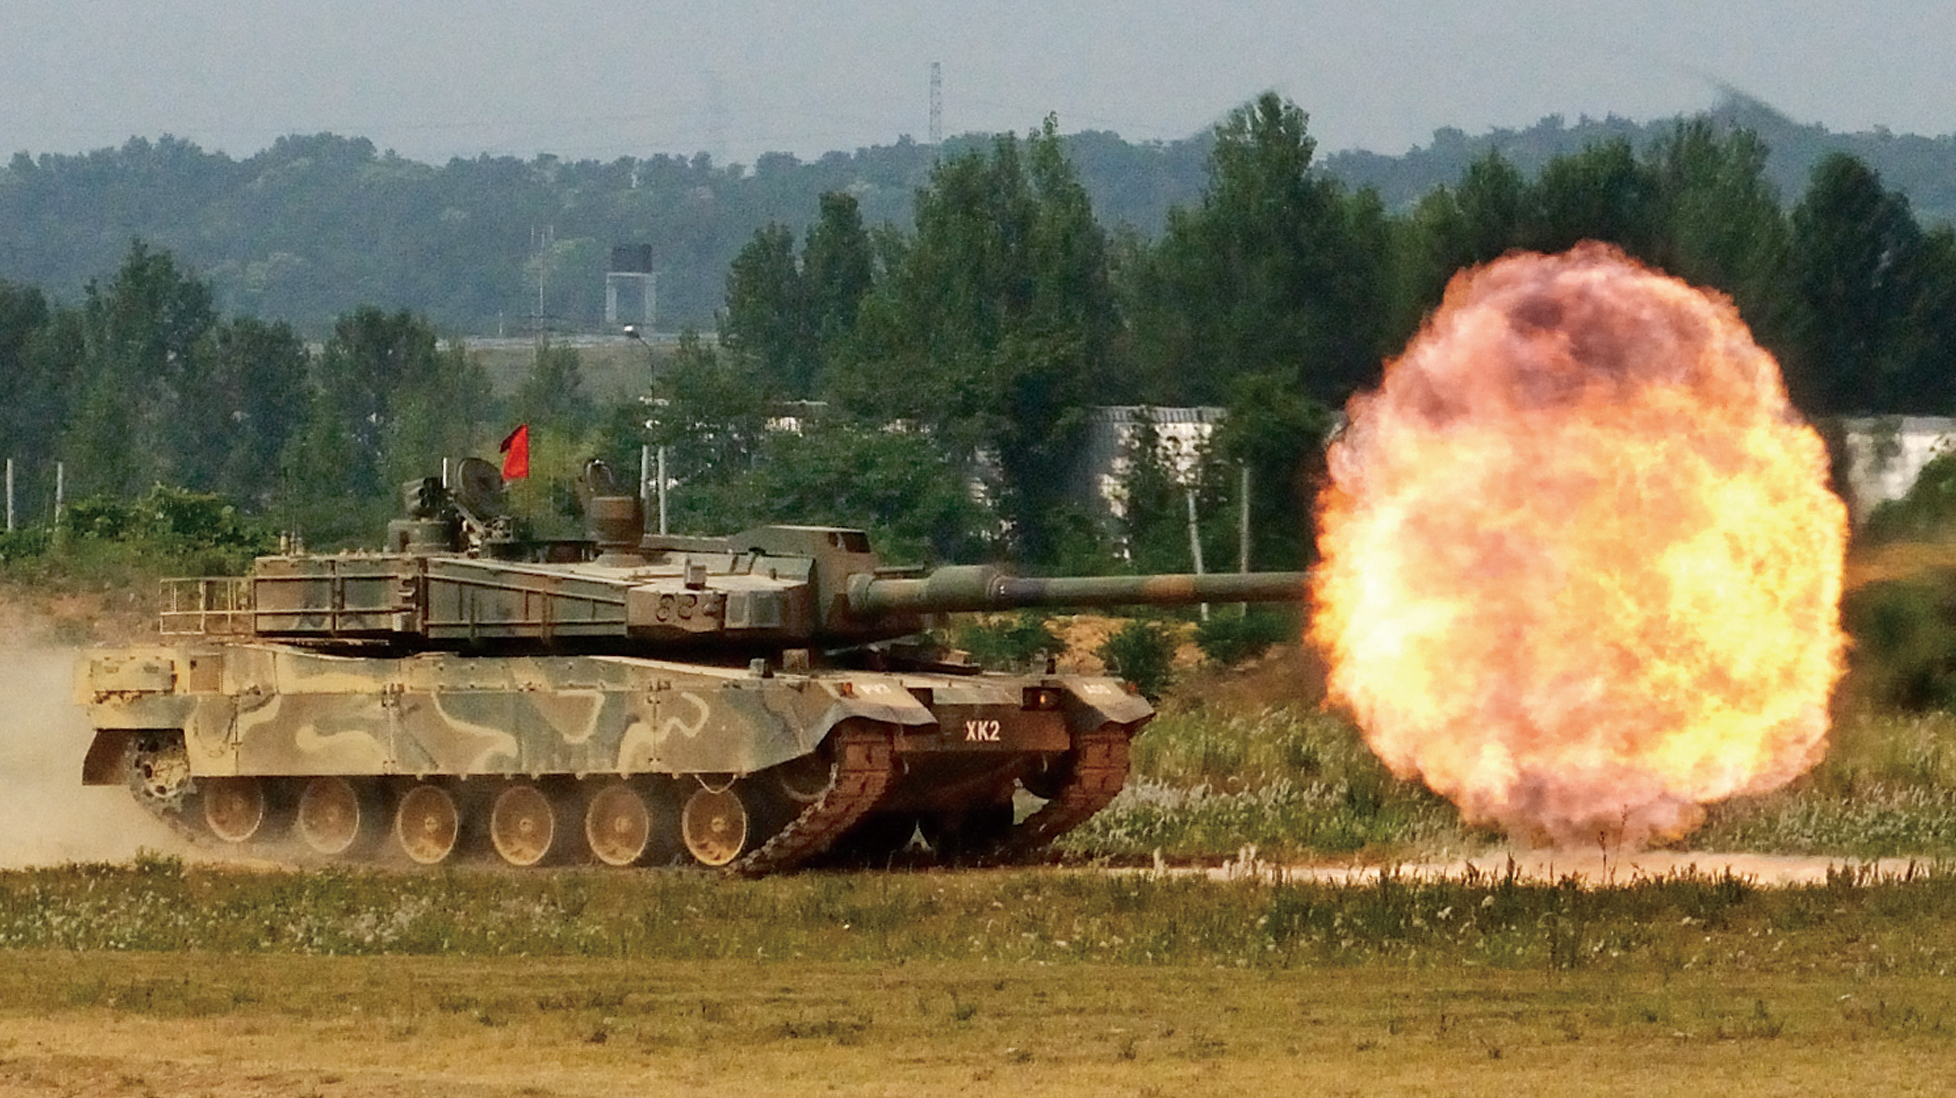 K2 Black Panther: The Most Expensive (And Lethal?) Tank on Earth